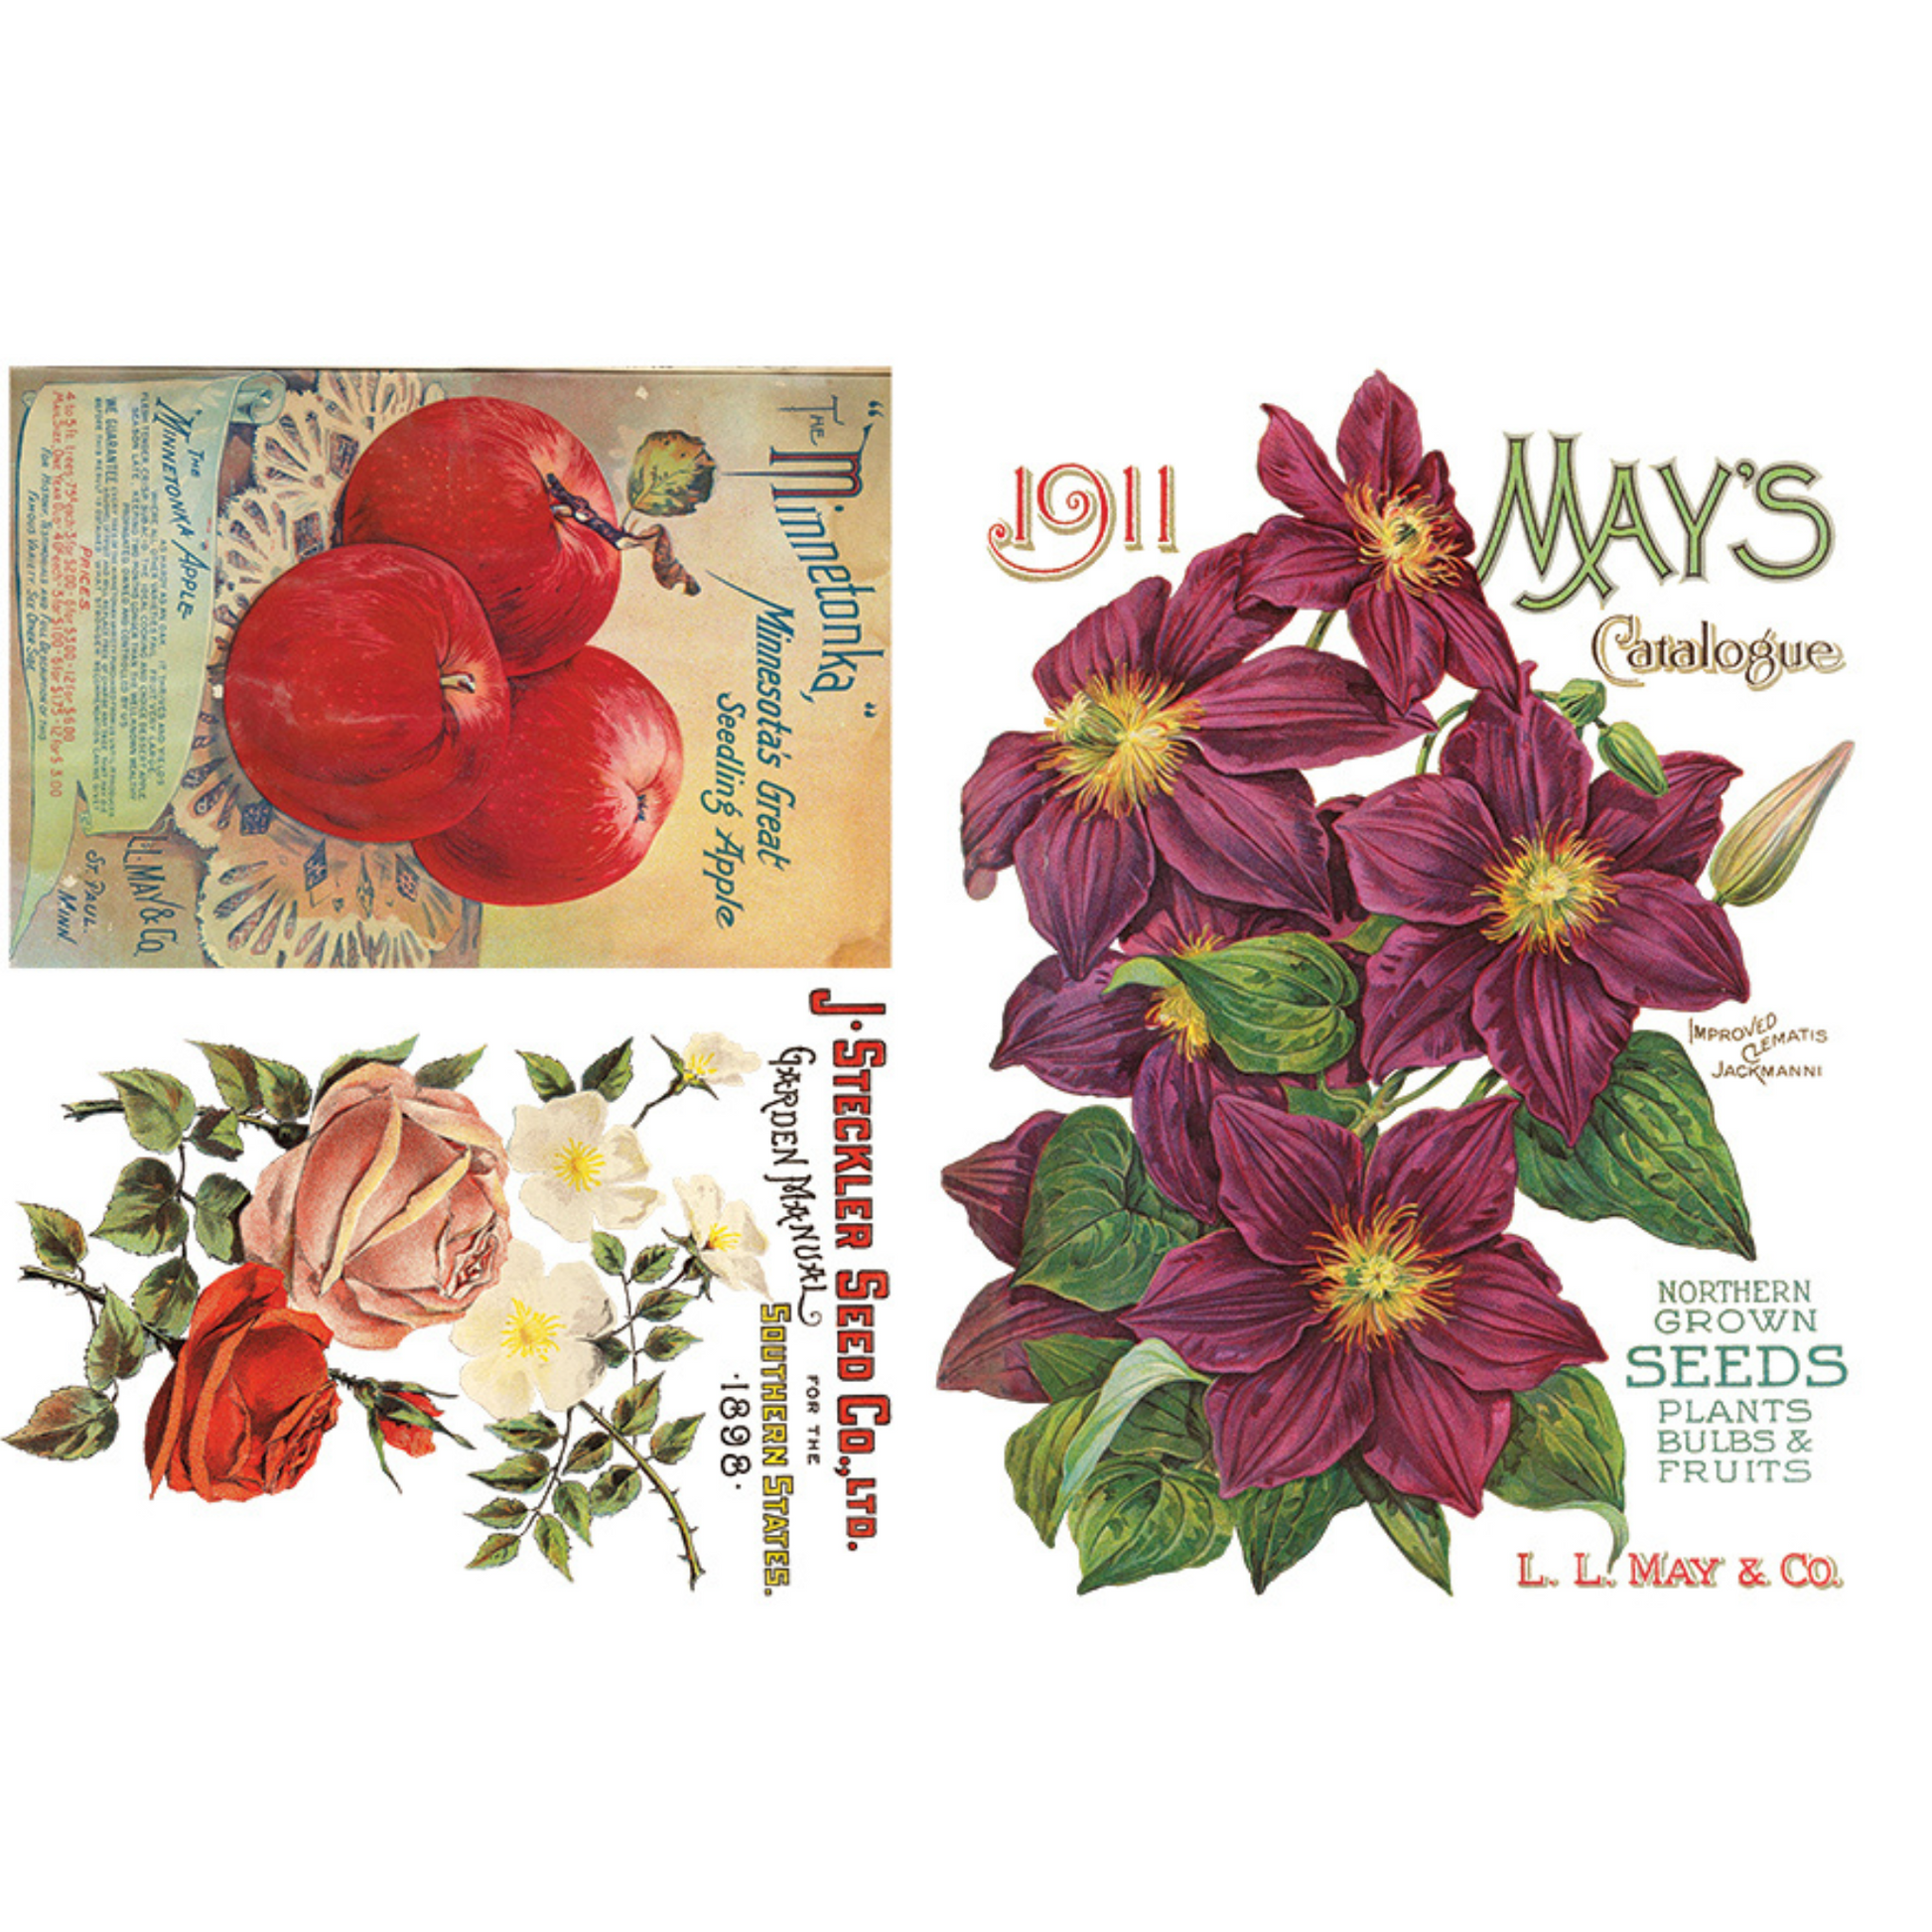 "Seed Catalogue" IOD Transfer by Iron Orchid Designs. Sheet 4 of 8. Available at Milton's Daughter.